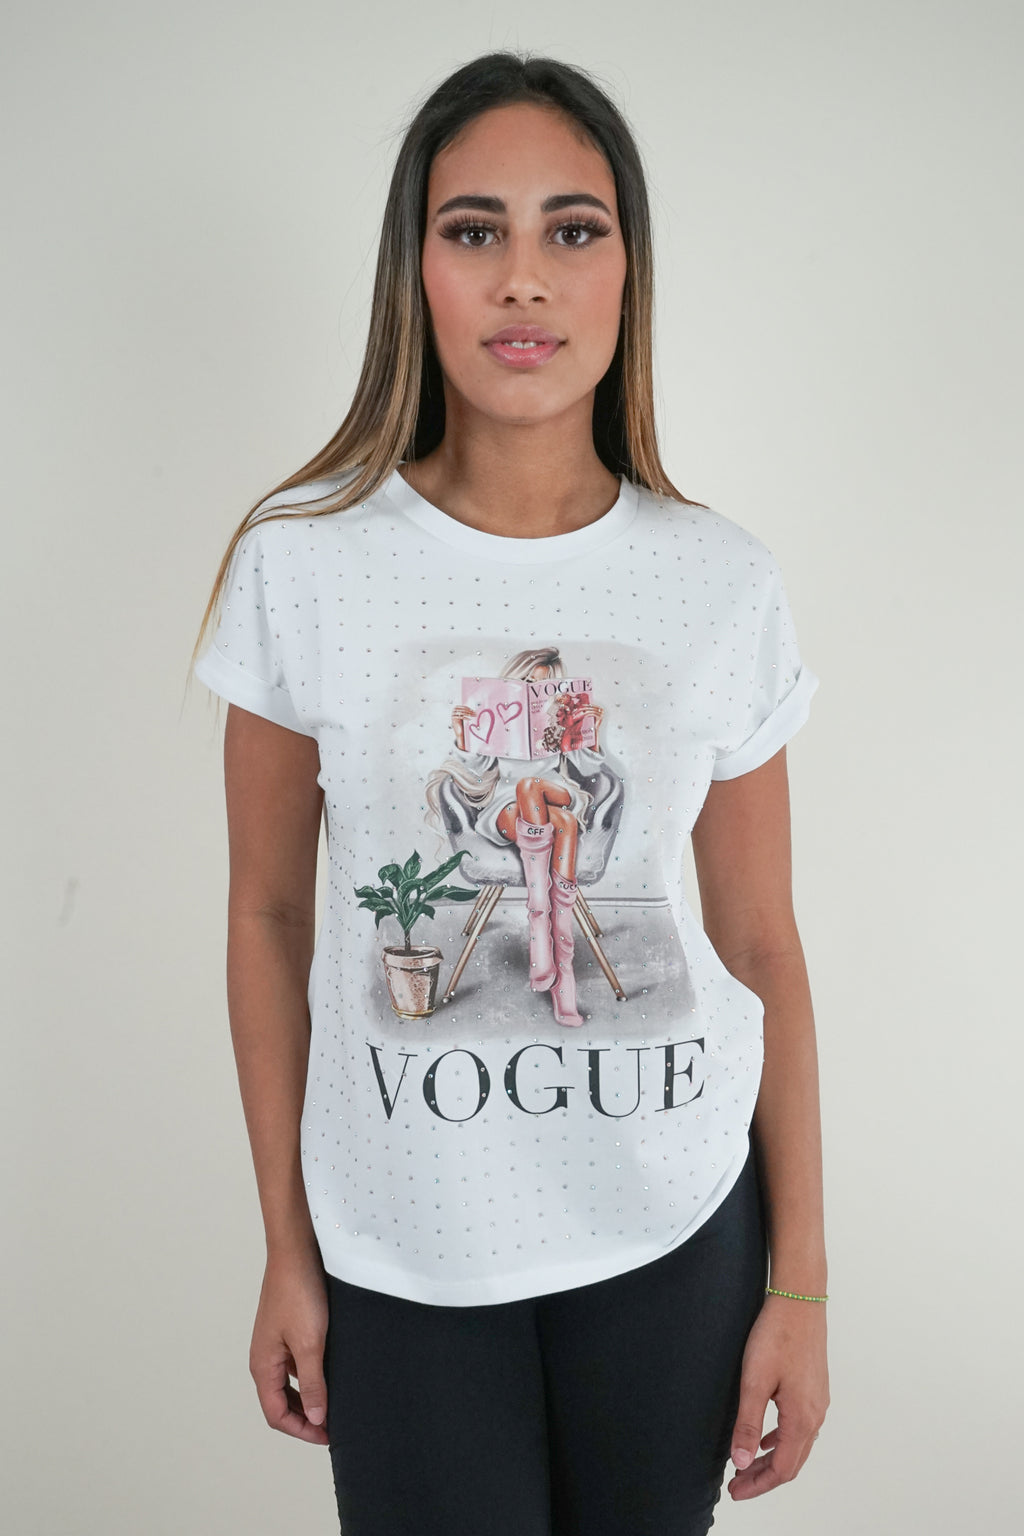 Vogue Graphic Embellished tee